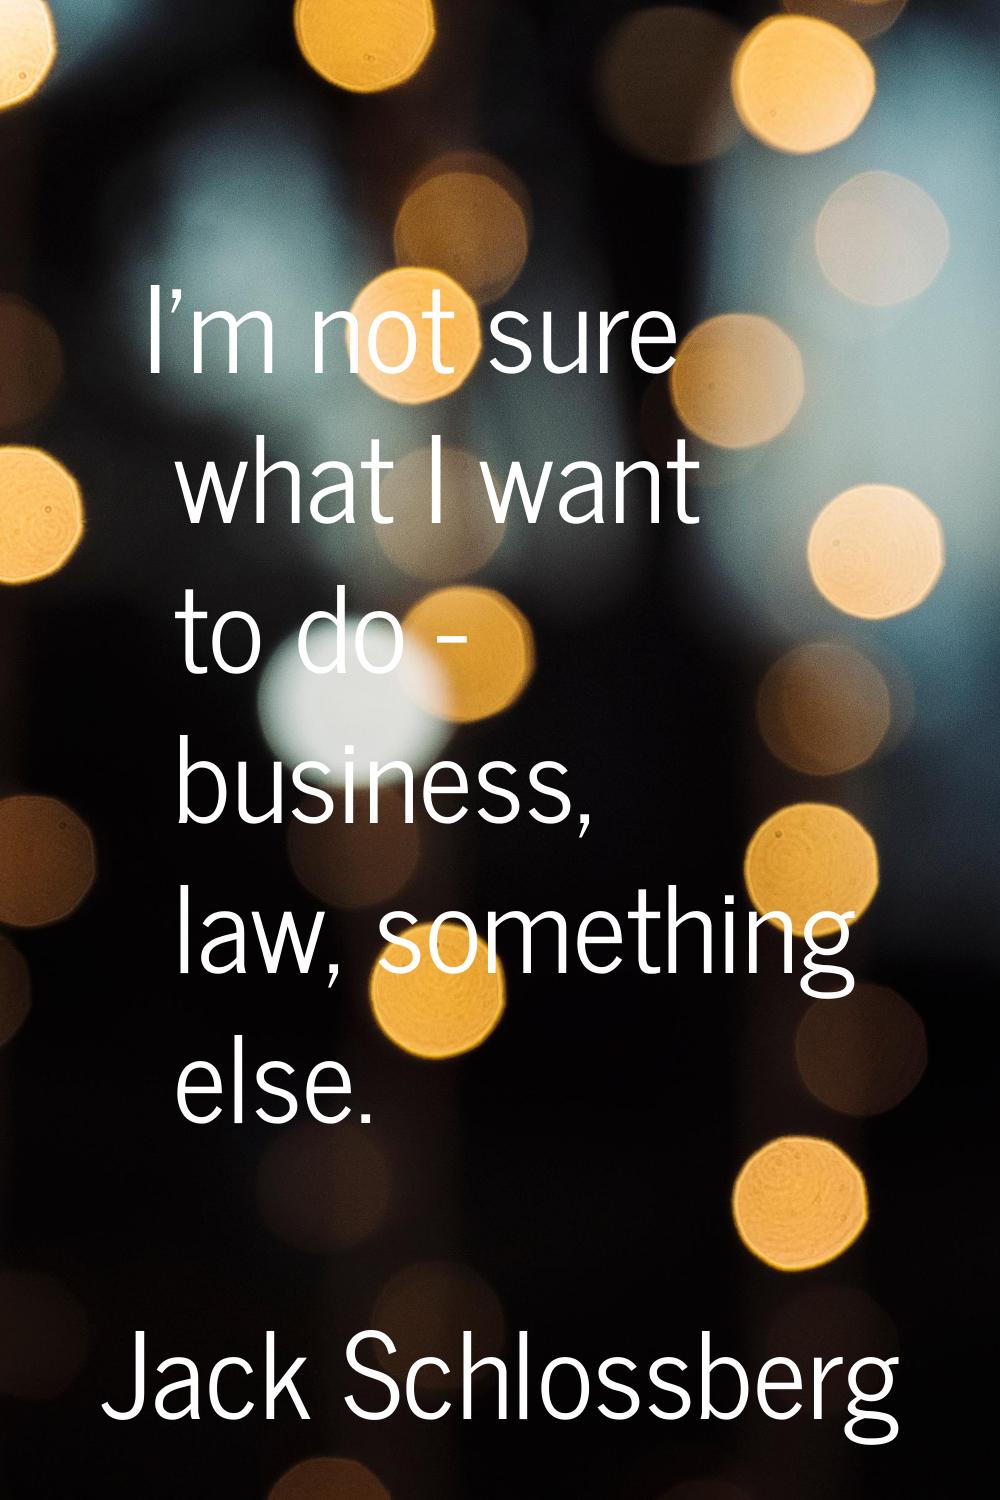 I'm not sure what I want to do - business, law, something else.